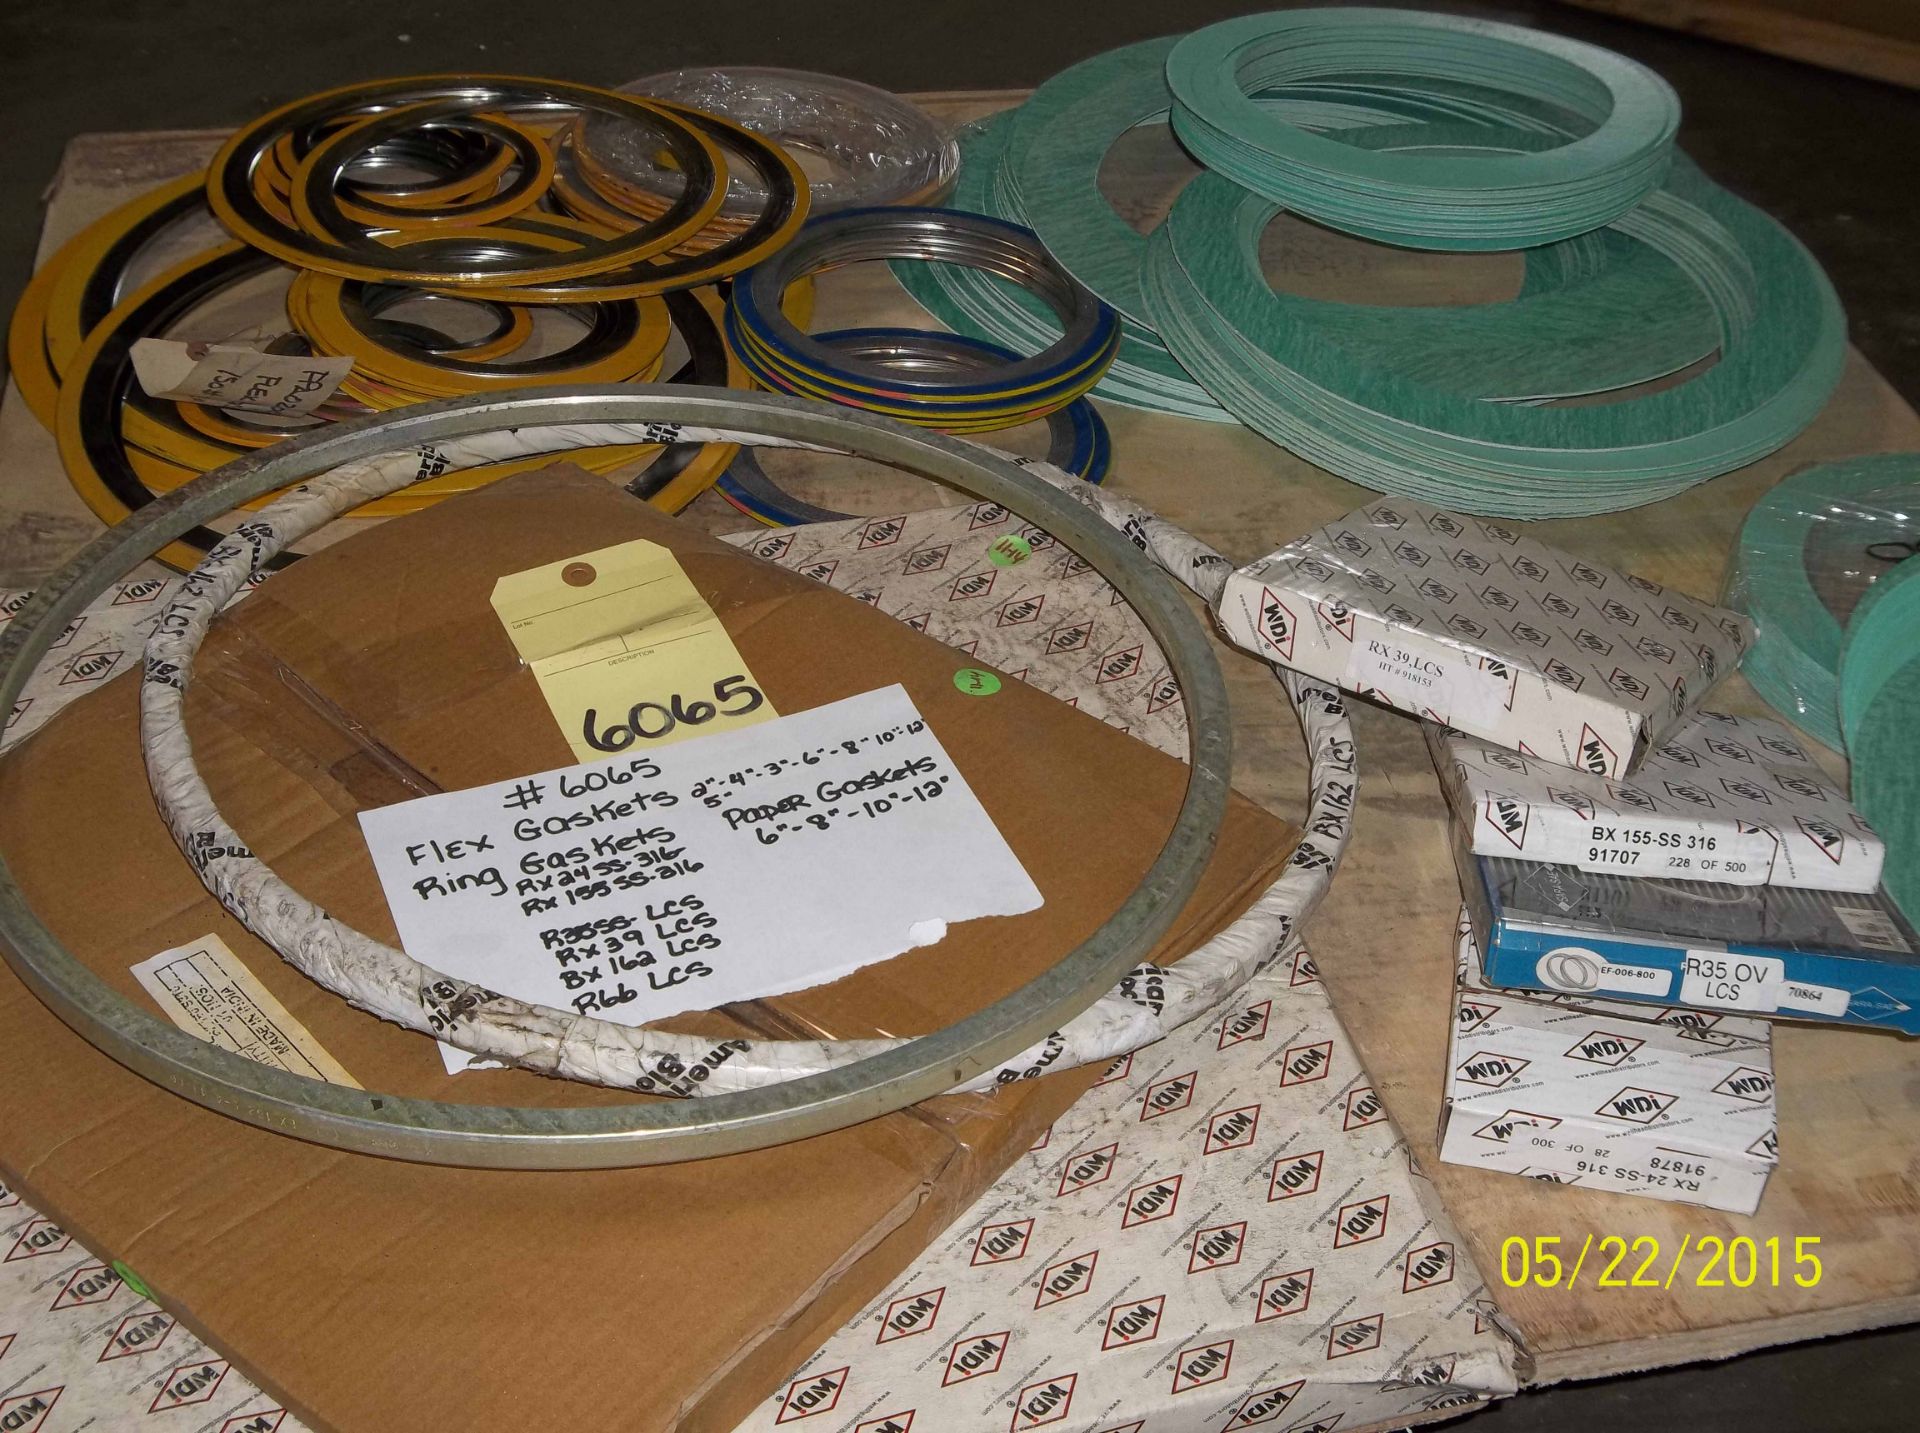 LOT CONSISTING OF FLEX GASKETS (2", 4", 3",5', 6", 8", 10", 12"), RING GASKETS (RX24SS-316,